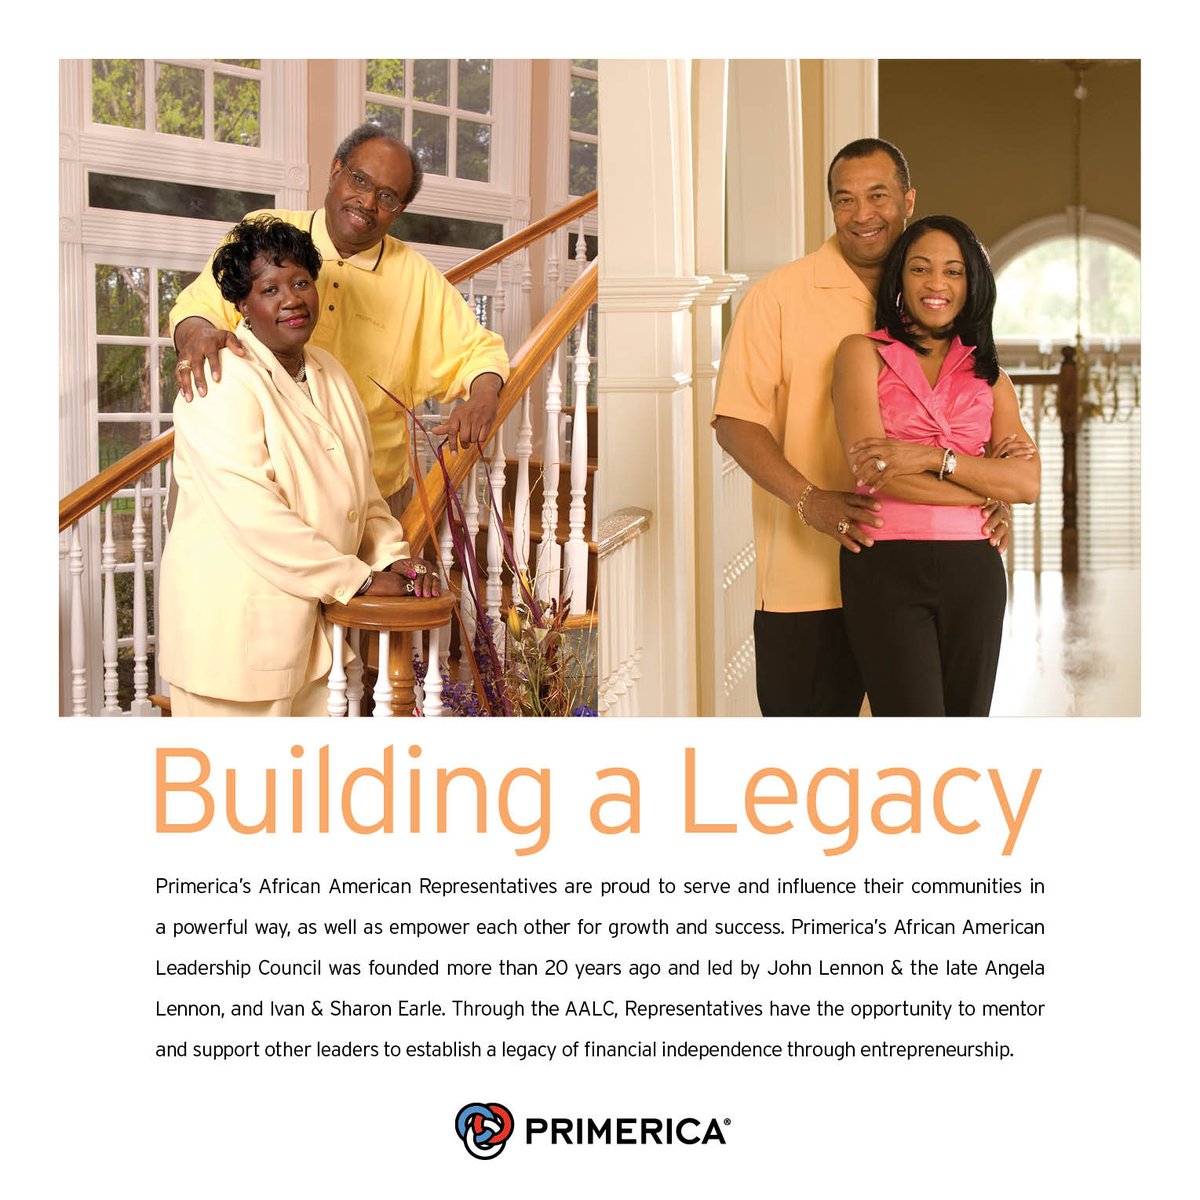 I'm proud to be a part of a company that celebrates and salutes the legacy of Primerica's African American sales force. #PrimericaProud